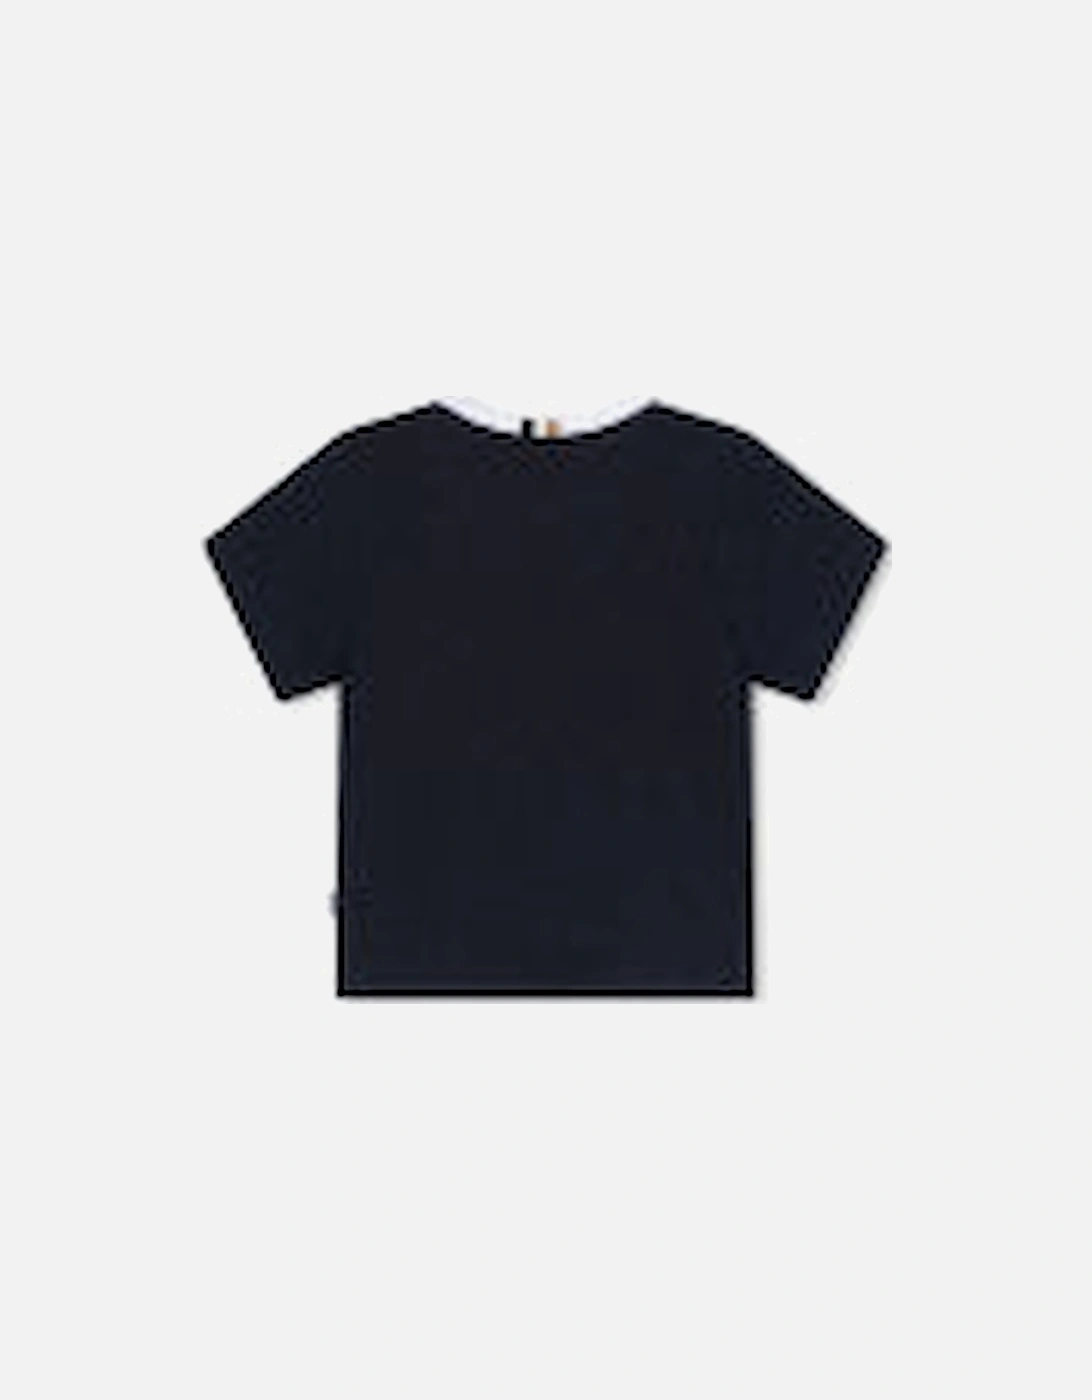 BABY/TODDLER ELECTRIC BLUE T SHIRT